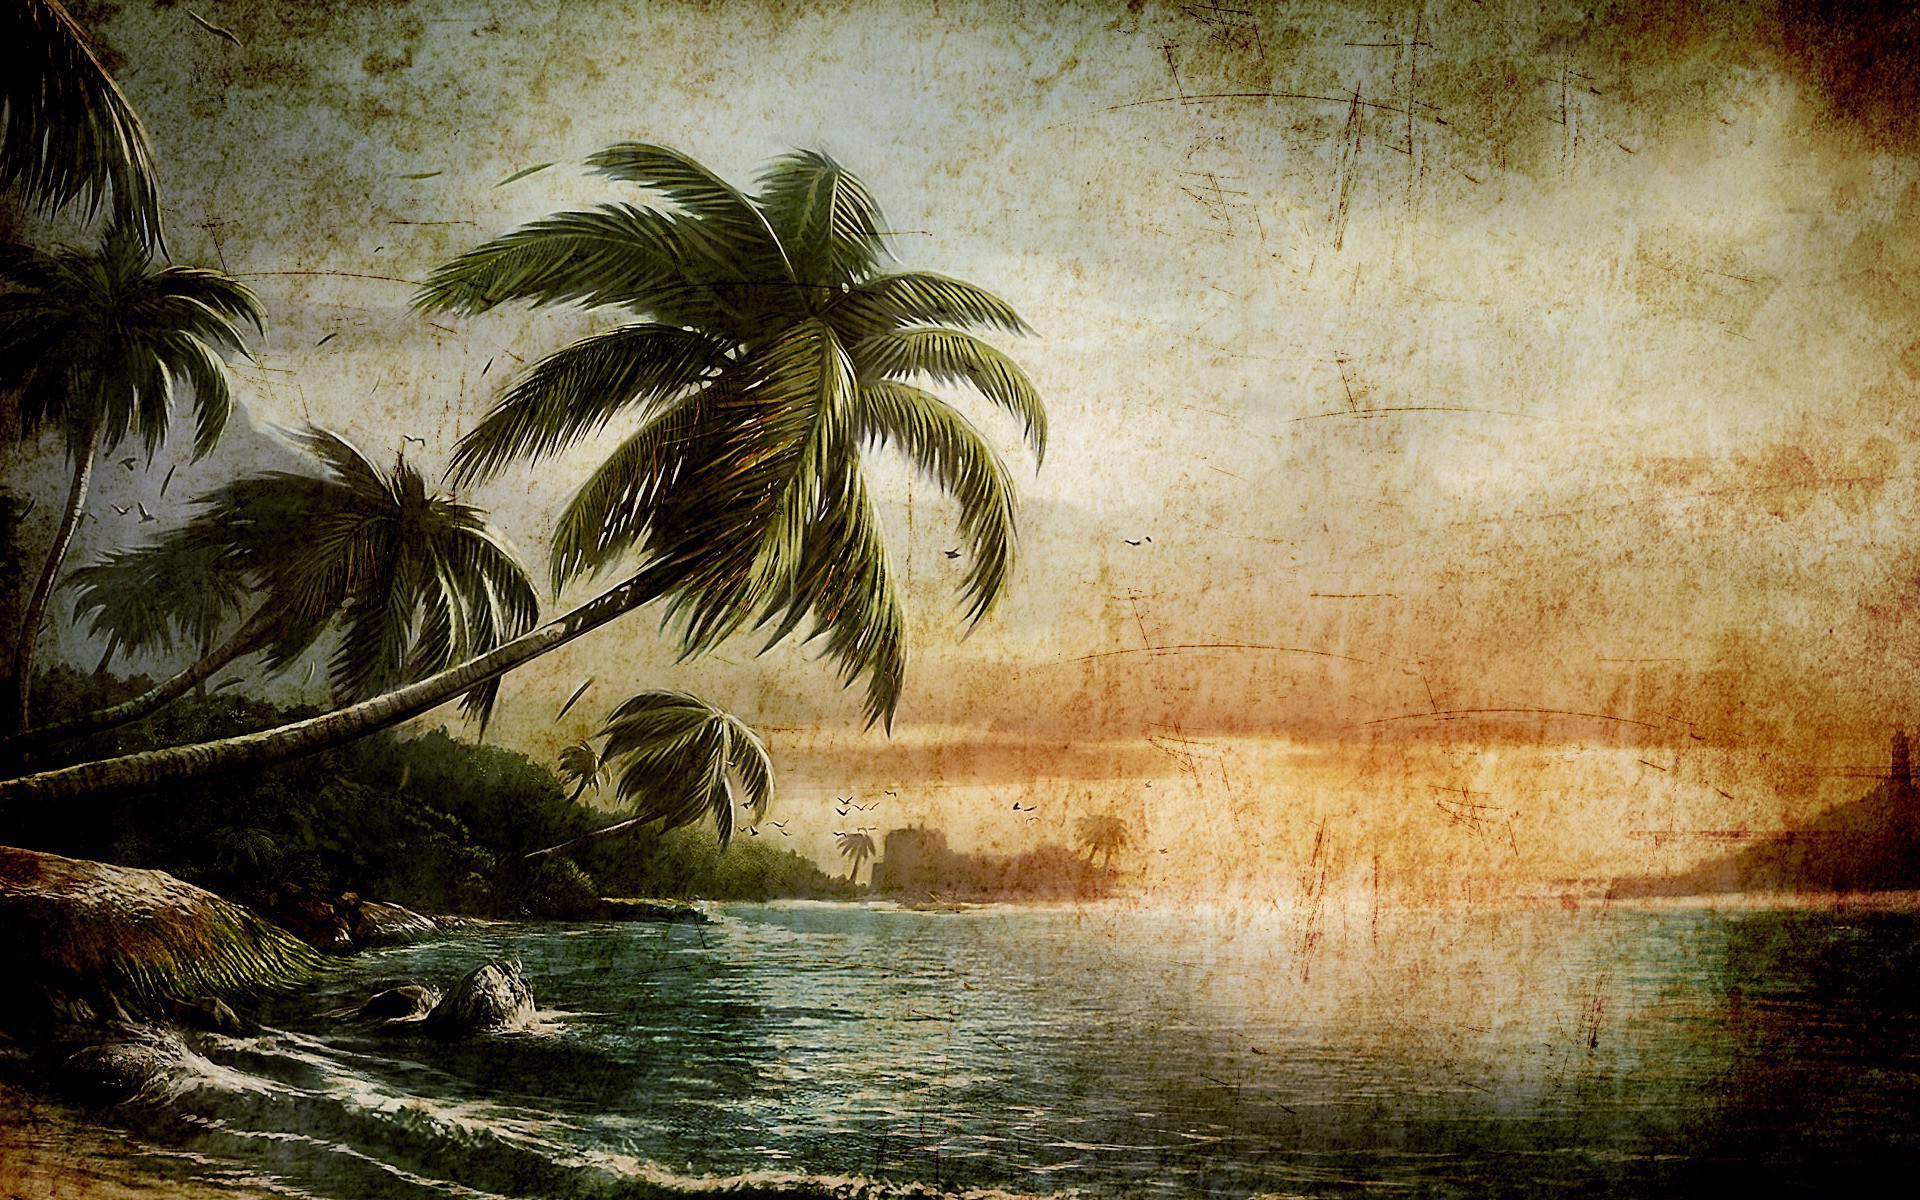 Wallpaper, sunlight, painting, video games, reflection, morning, jungle, Dead Island, tree, 1920x1200 px, computer wallpaper, arecales 1920x1200